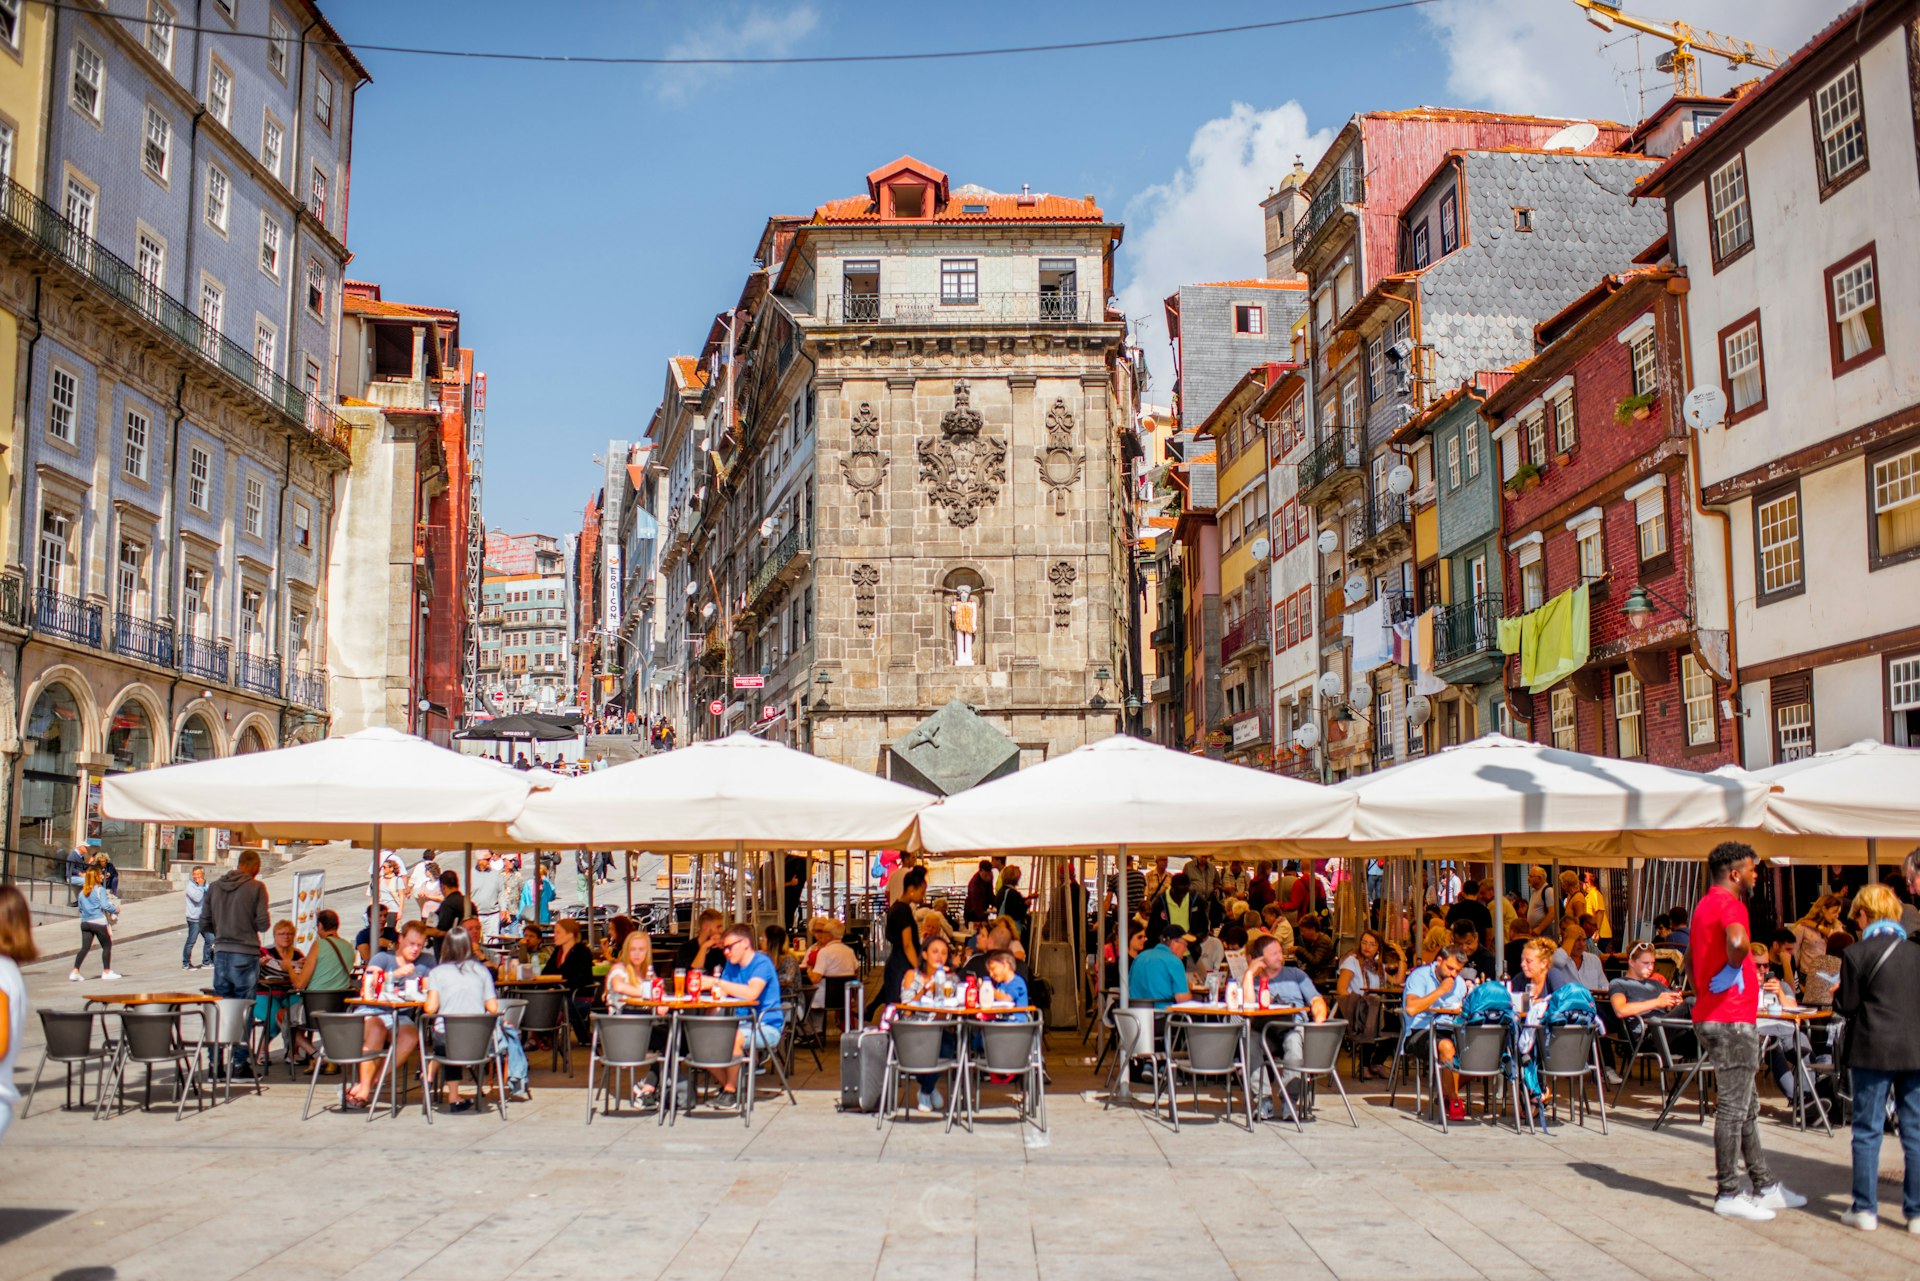 People sat at restaurant tables under sunshades in a city square